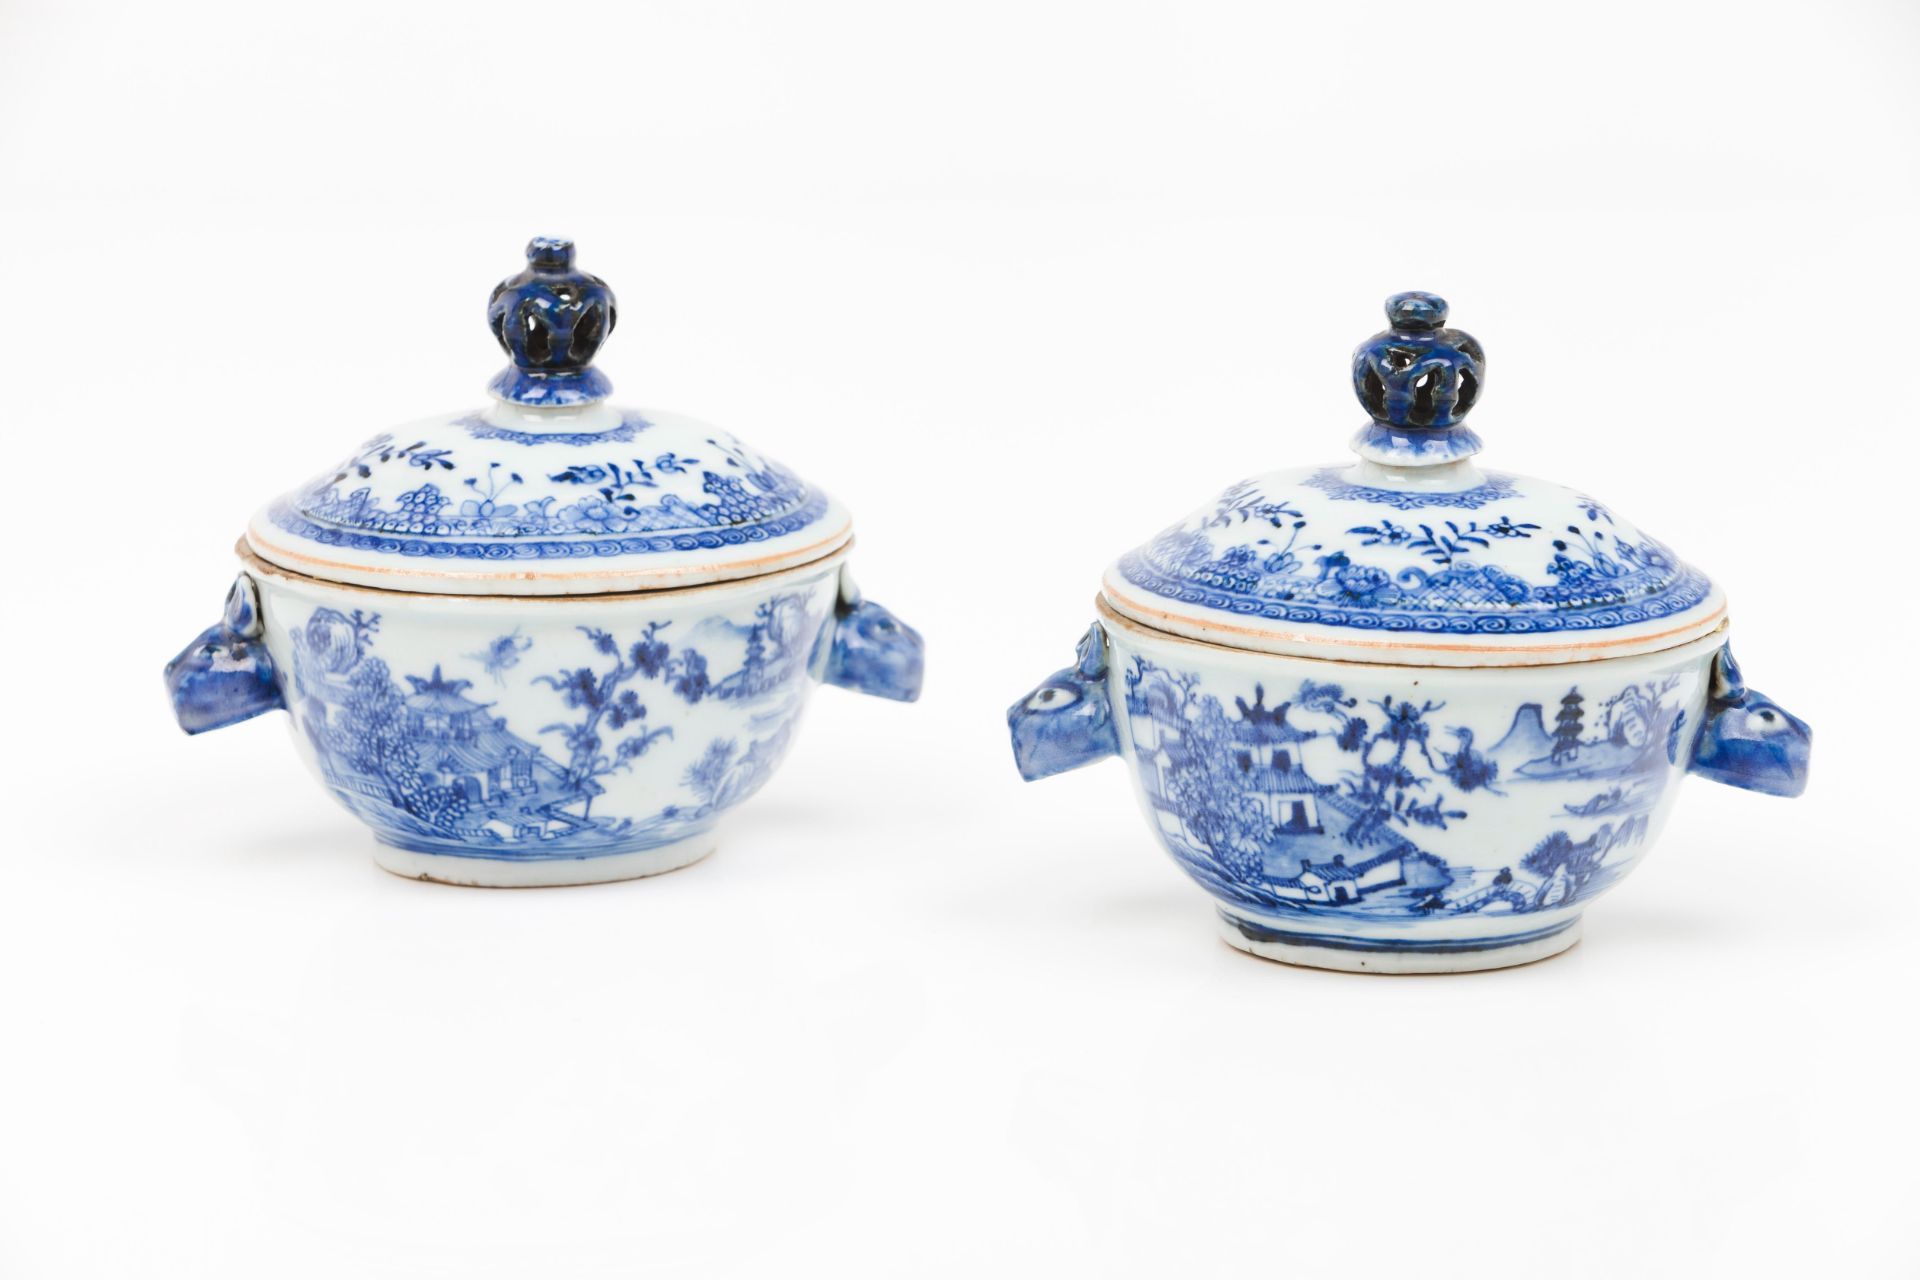 A pair of small oval tureens and covers